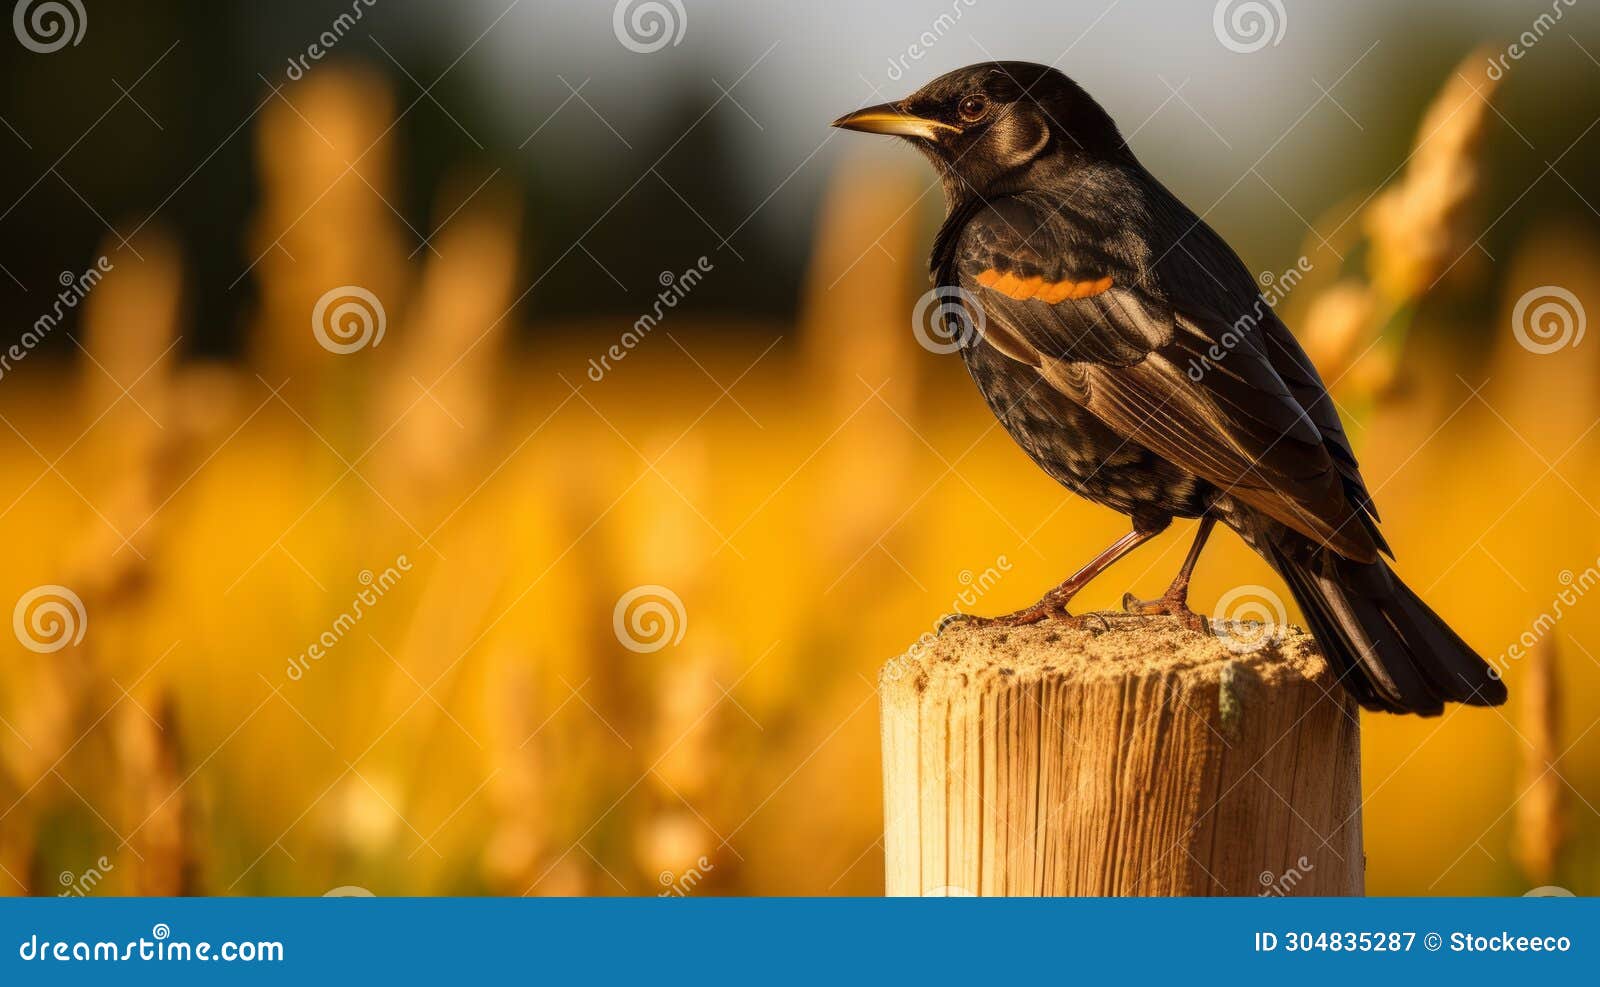 glowing blackbird perched on wooden post in lush field